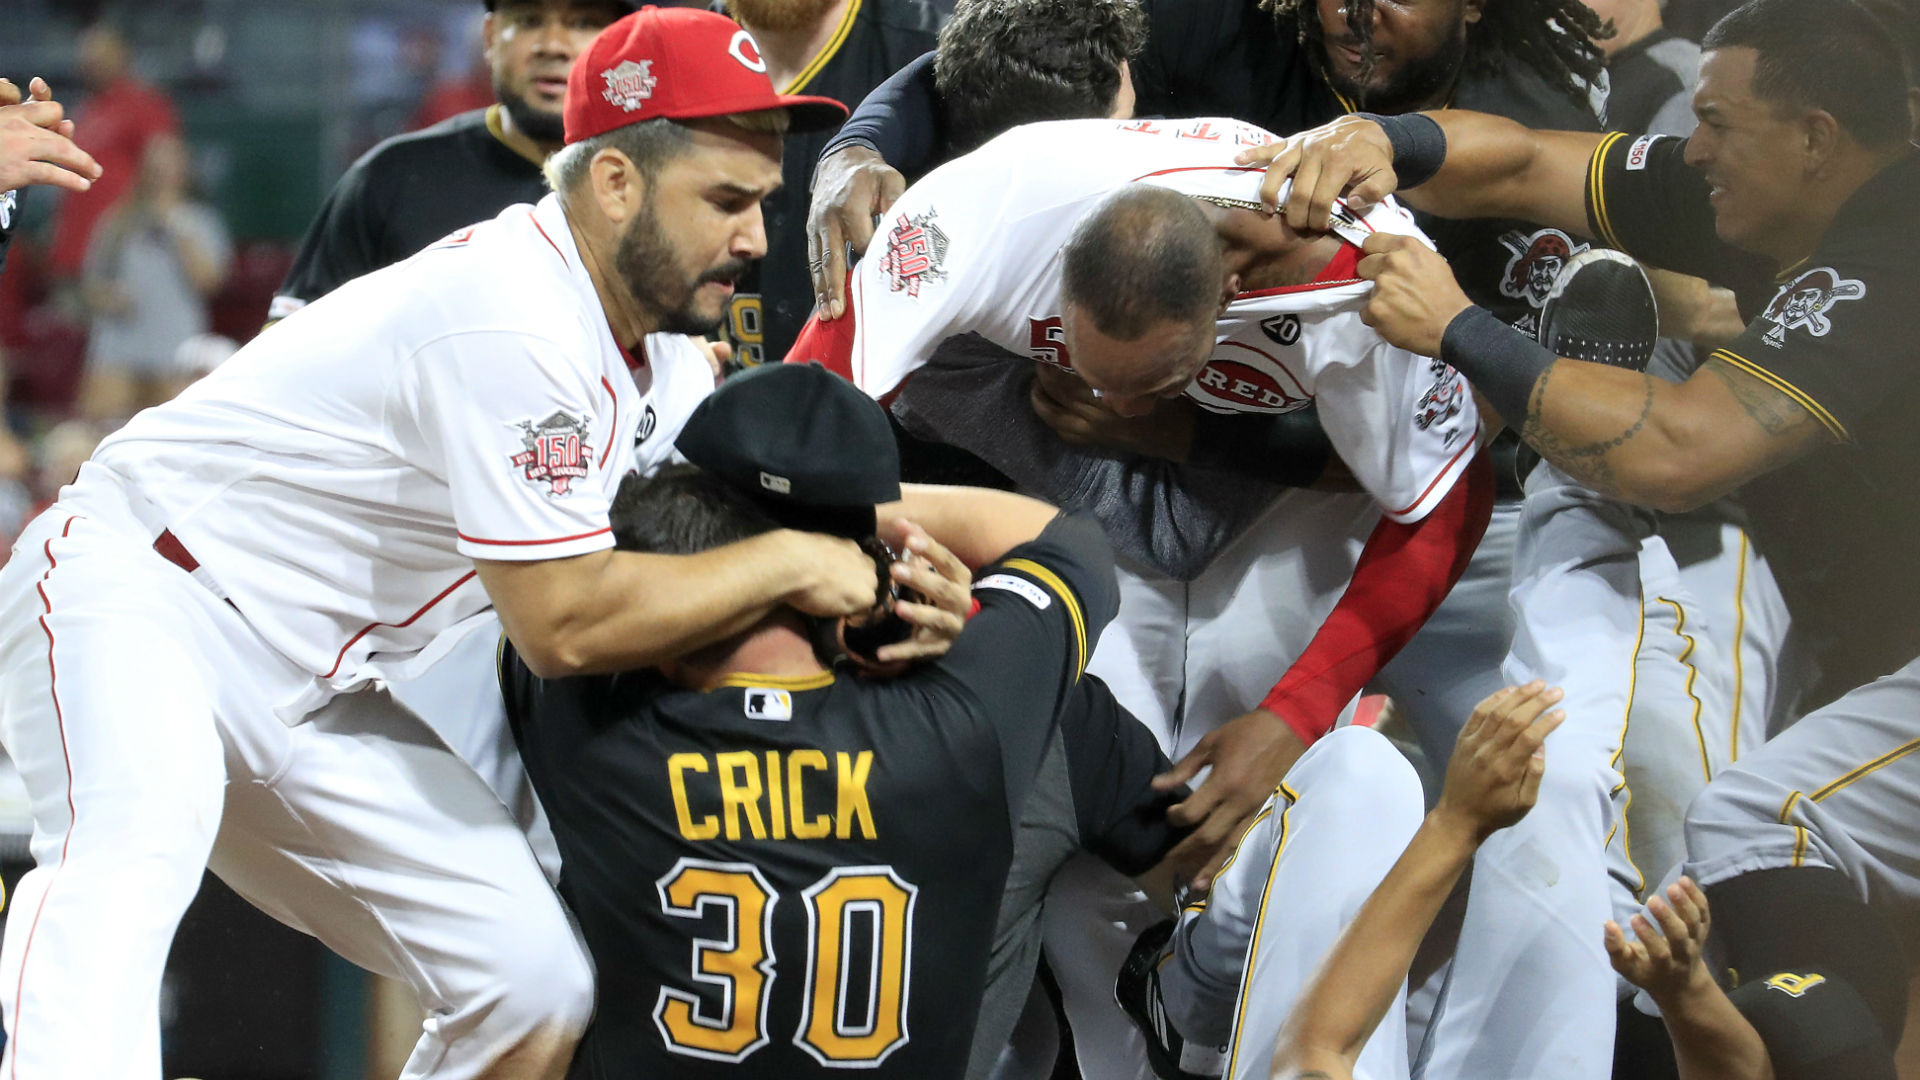 The two teams have played 12 games this year, resulting in nine hit batters, 15 ejections, and a couple of major benches-clearing incidents.